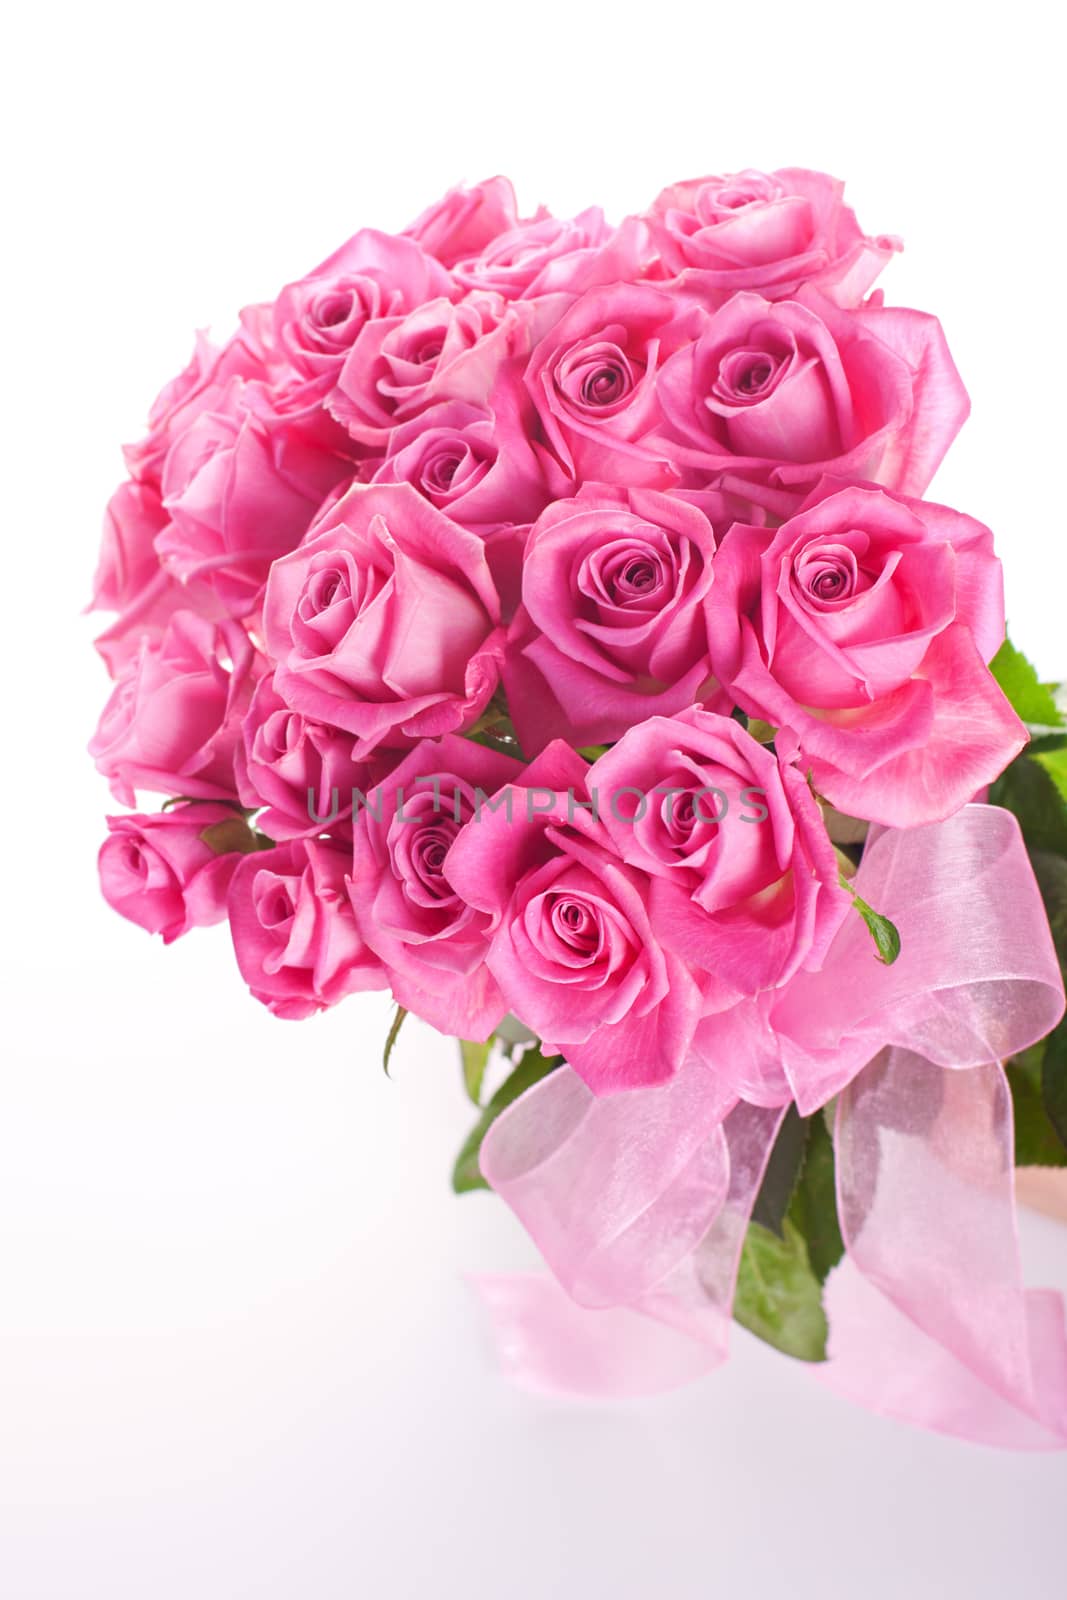 Bouquet of pink roses isolated on white background